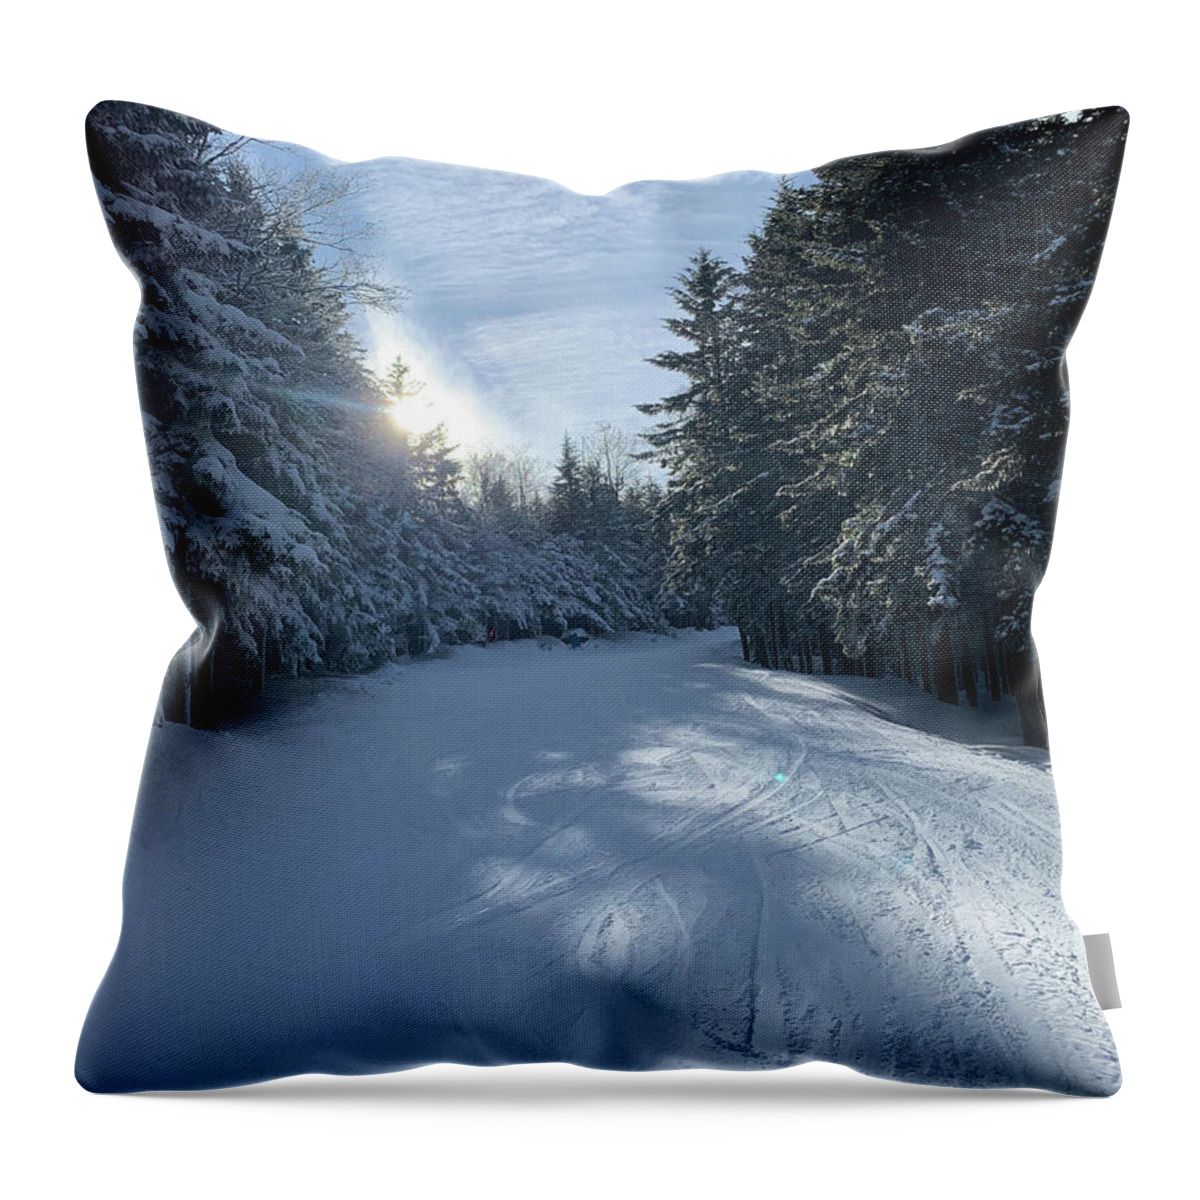  Throw Pillow featuring the photograph Winter Wonderland #10 by Annamaria Frost